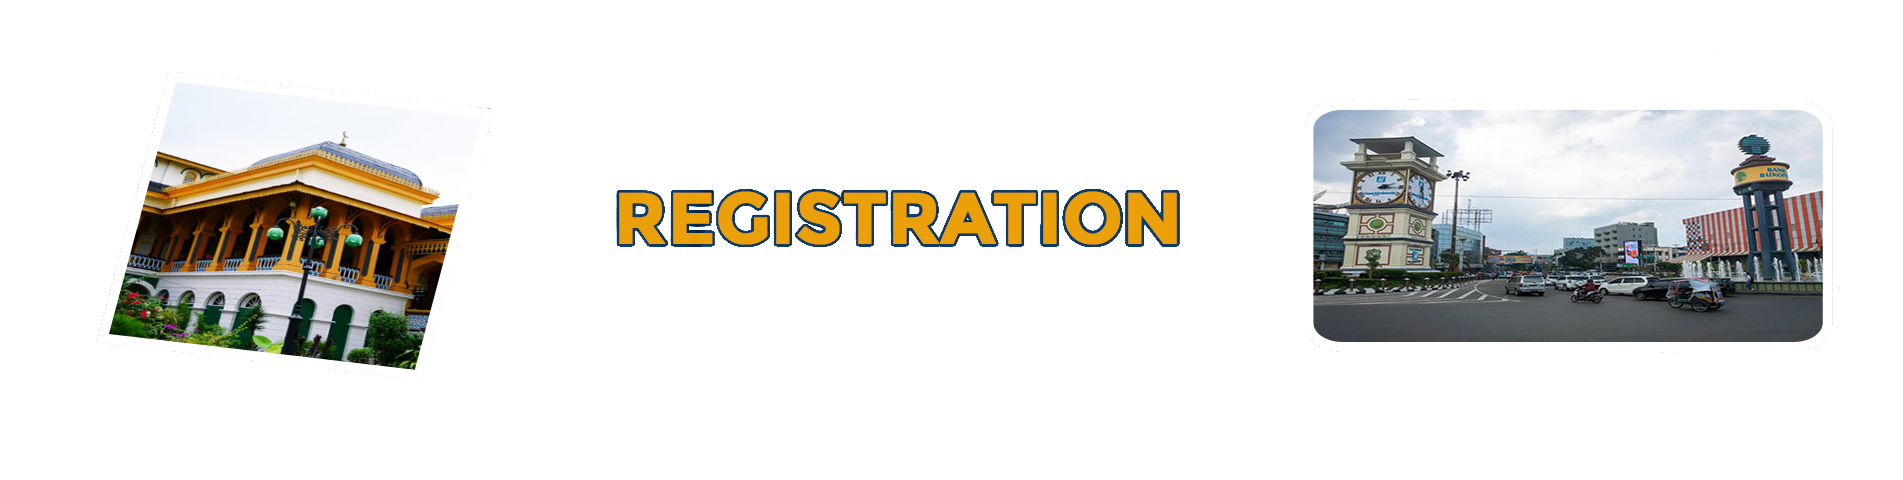 Registration | International Conference on Mechanical, Electronics, Computer, and Industrial Technology